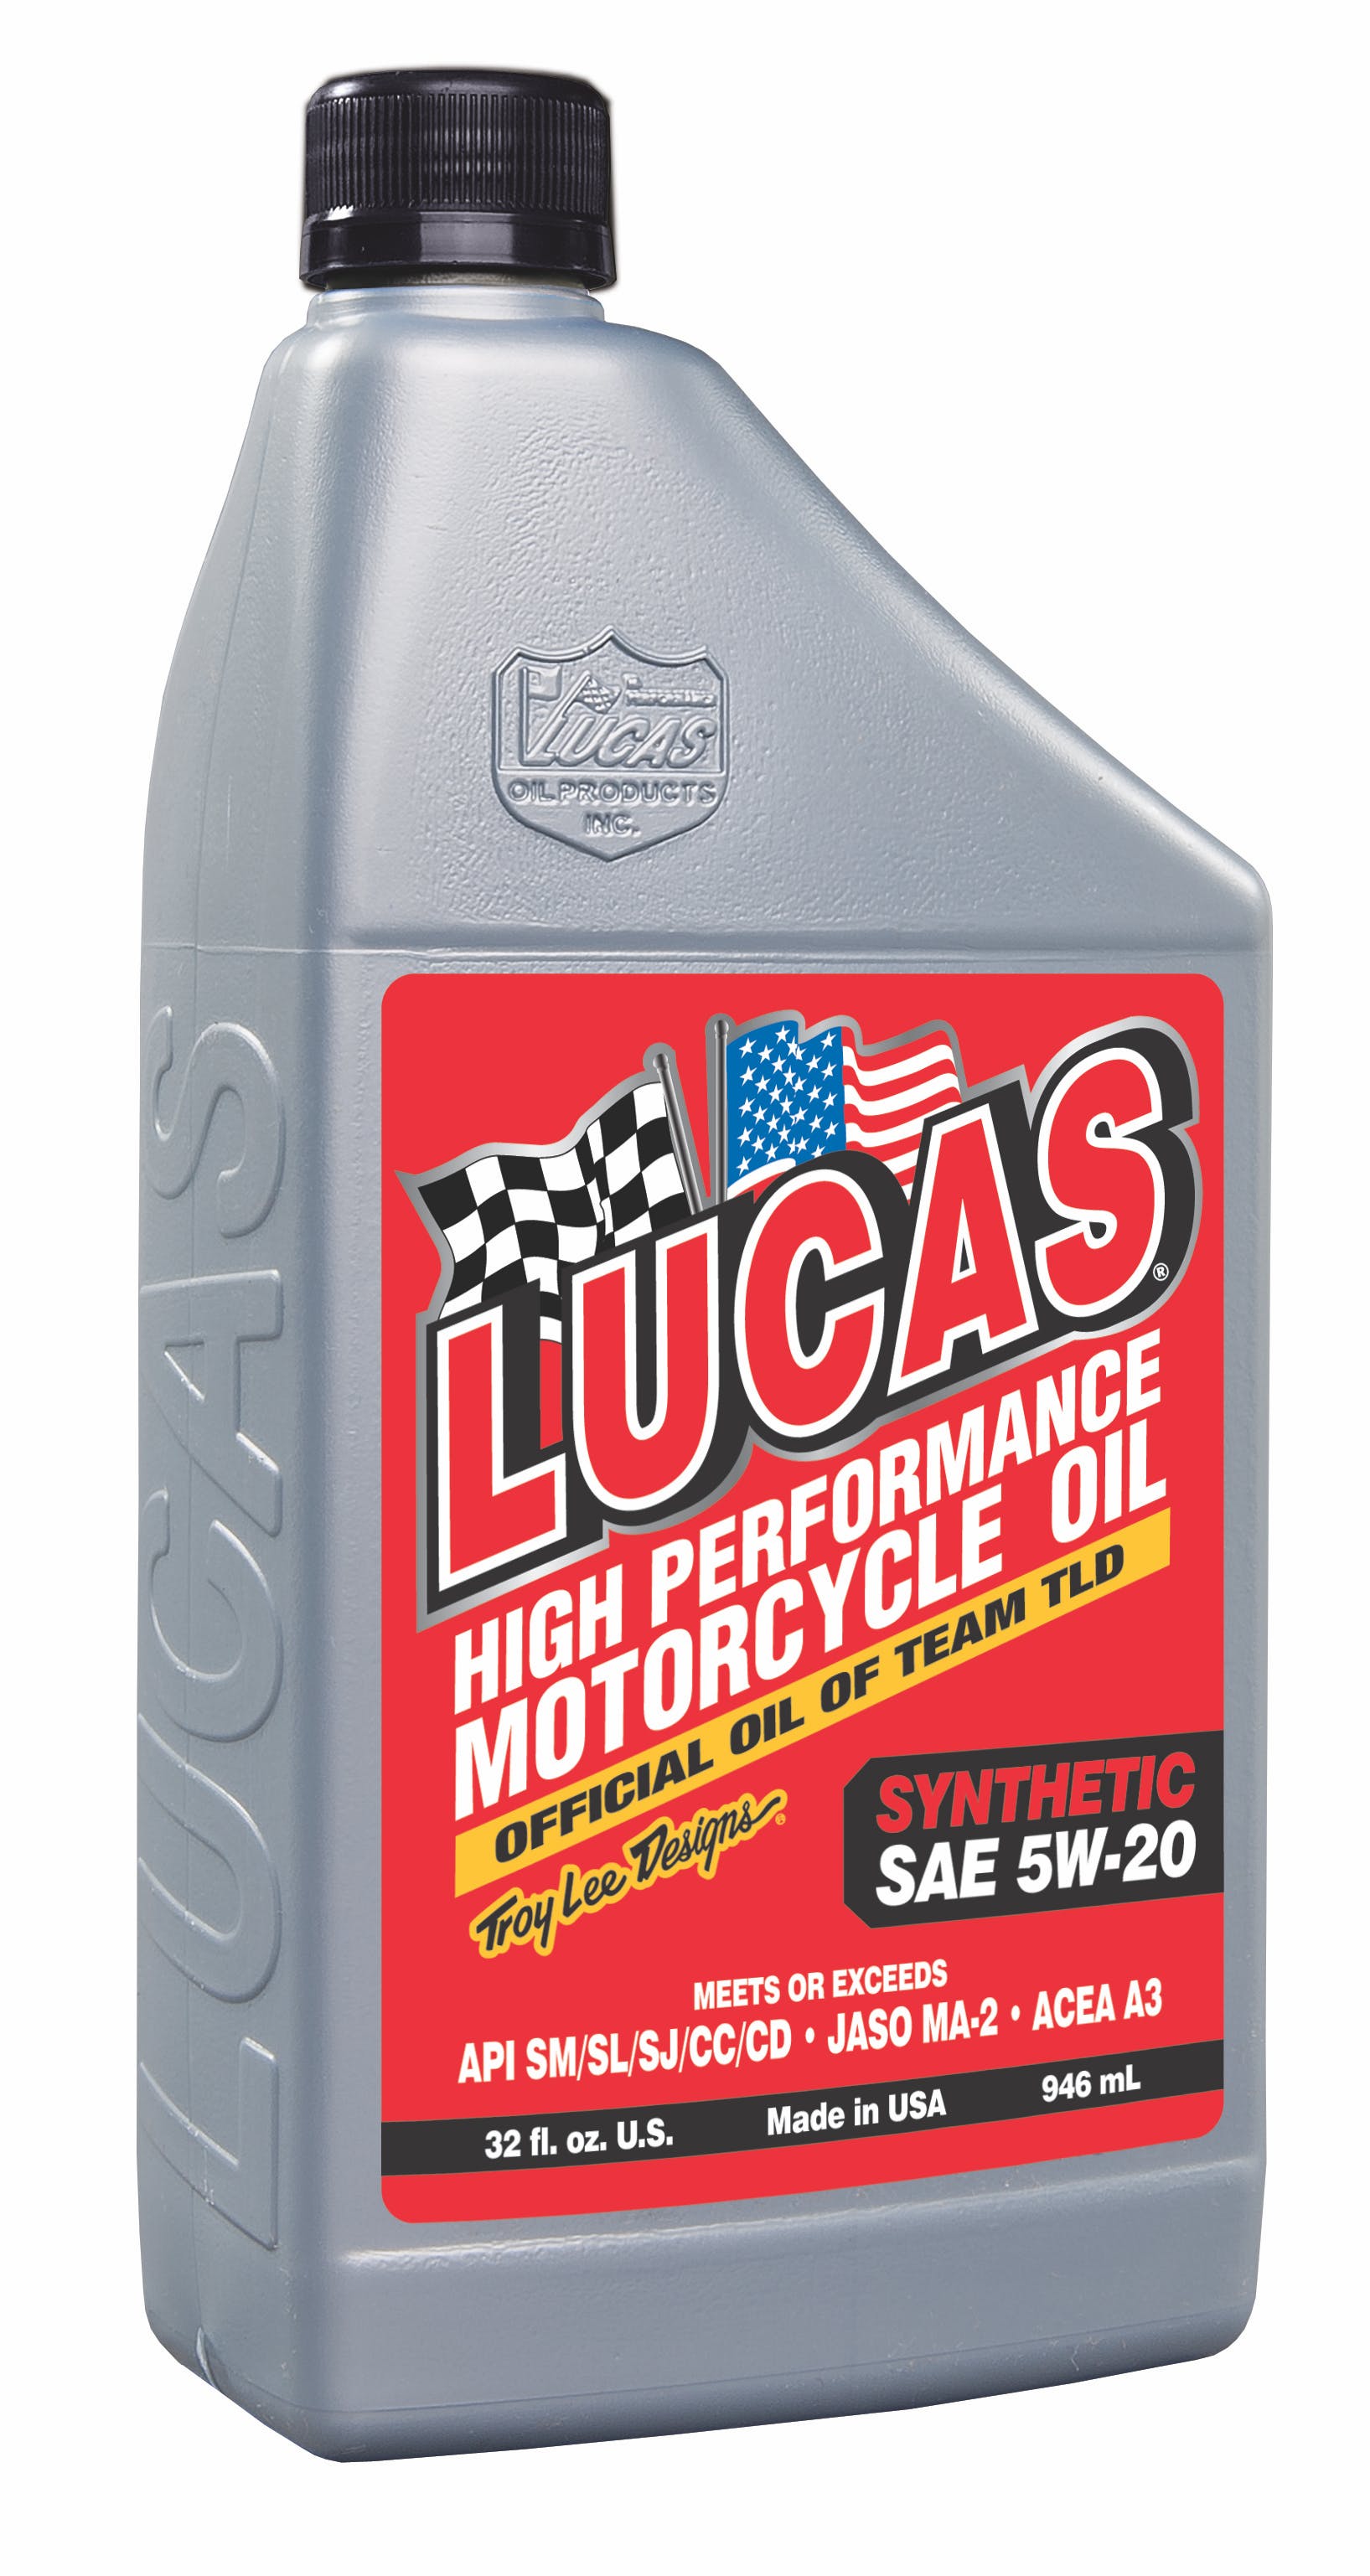 Lucas OIL Synthetic SAE 5W-20 Motorcycle Oil (1 QT) 20704